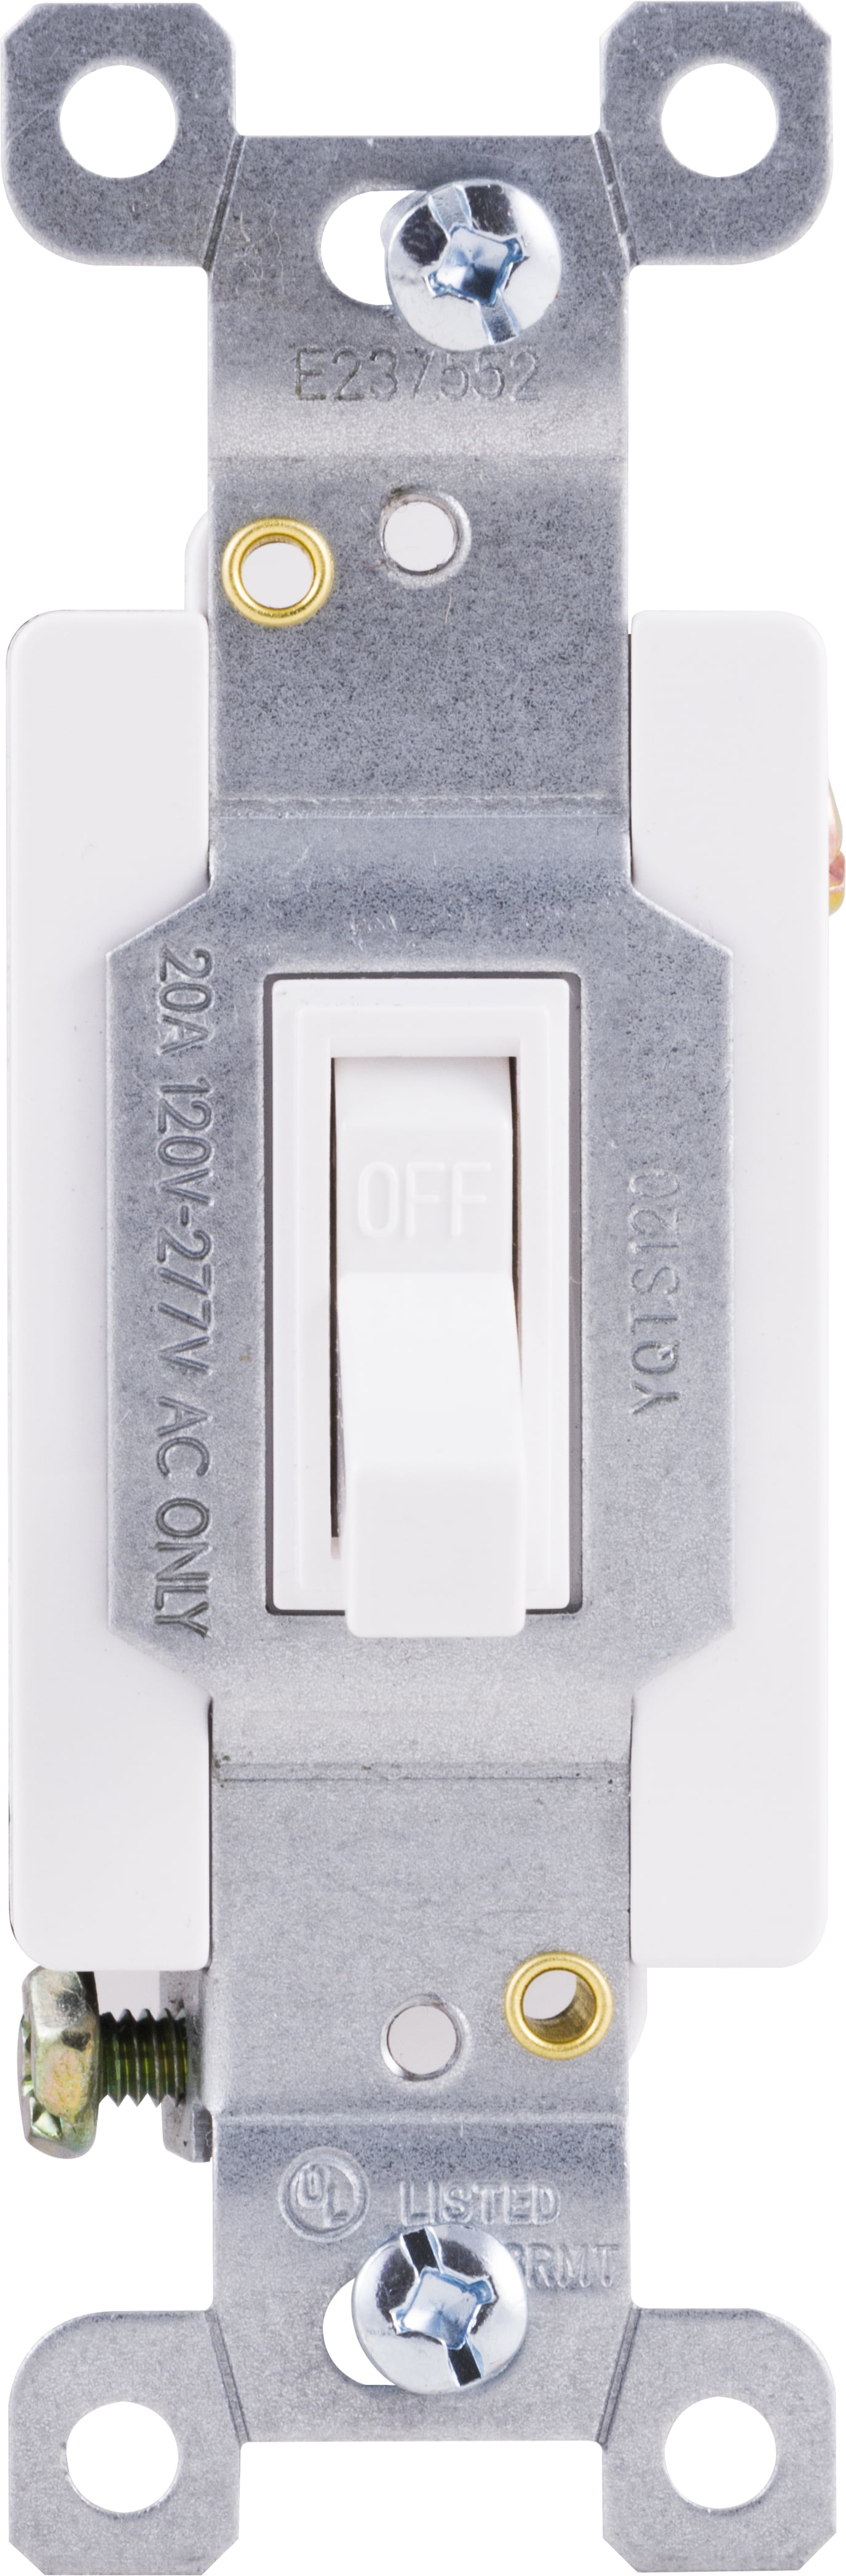 GE UltraPro Heavy-Duty Grounding Toggle Switch- compatible with smart control systems